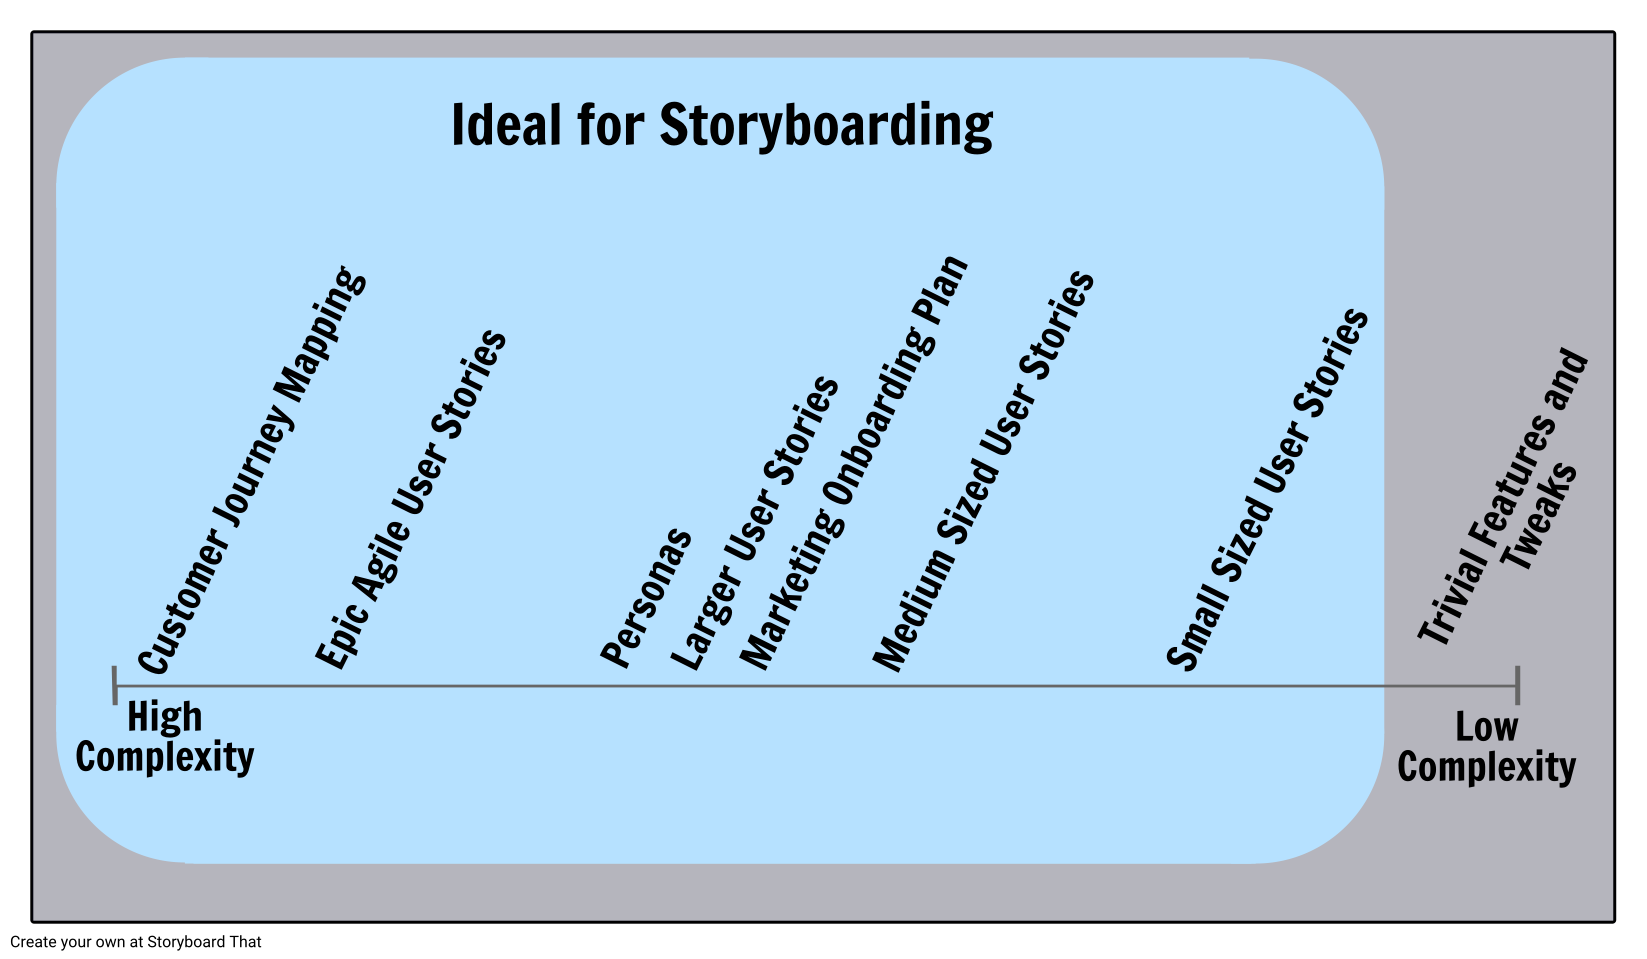 When to Use a Storyboard